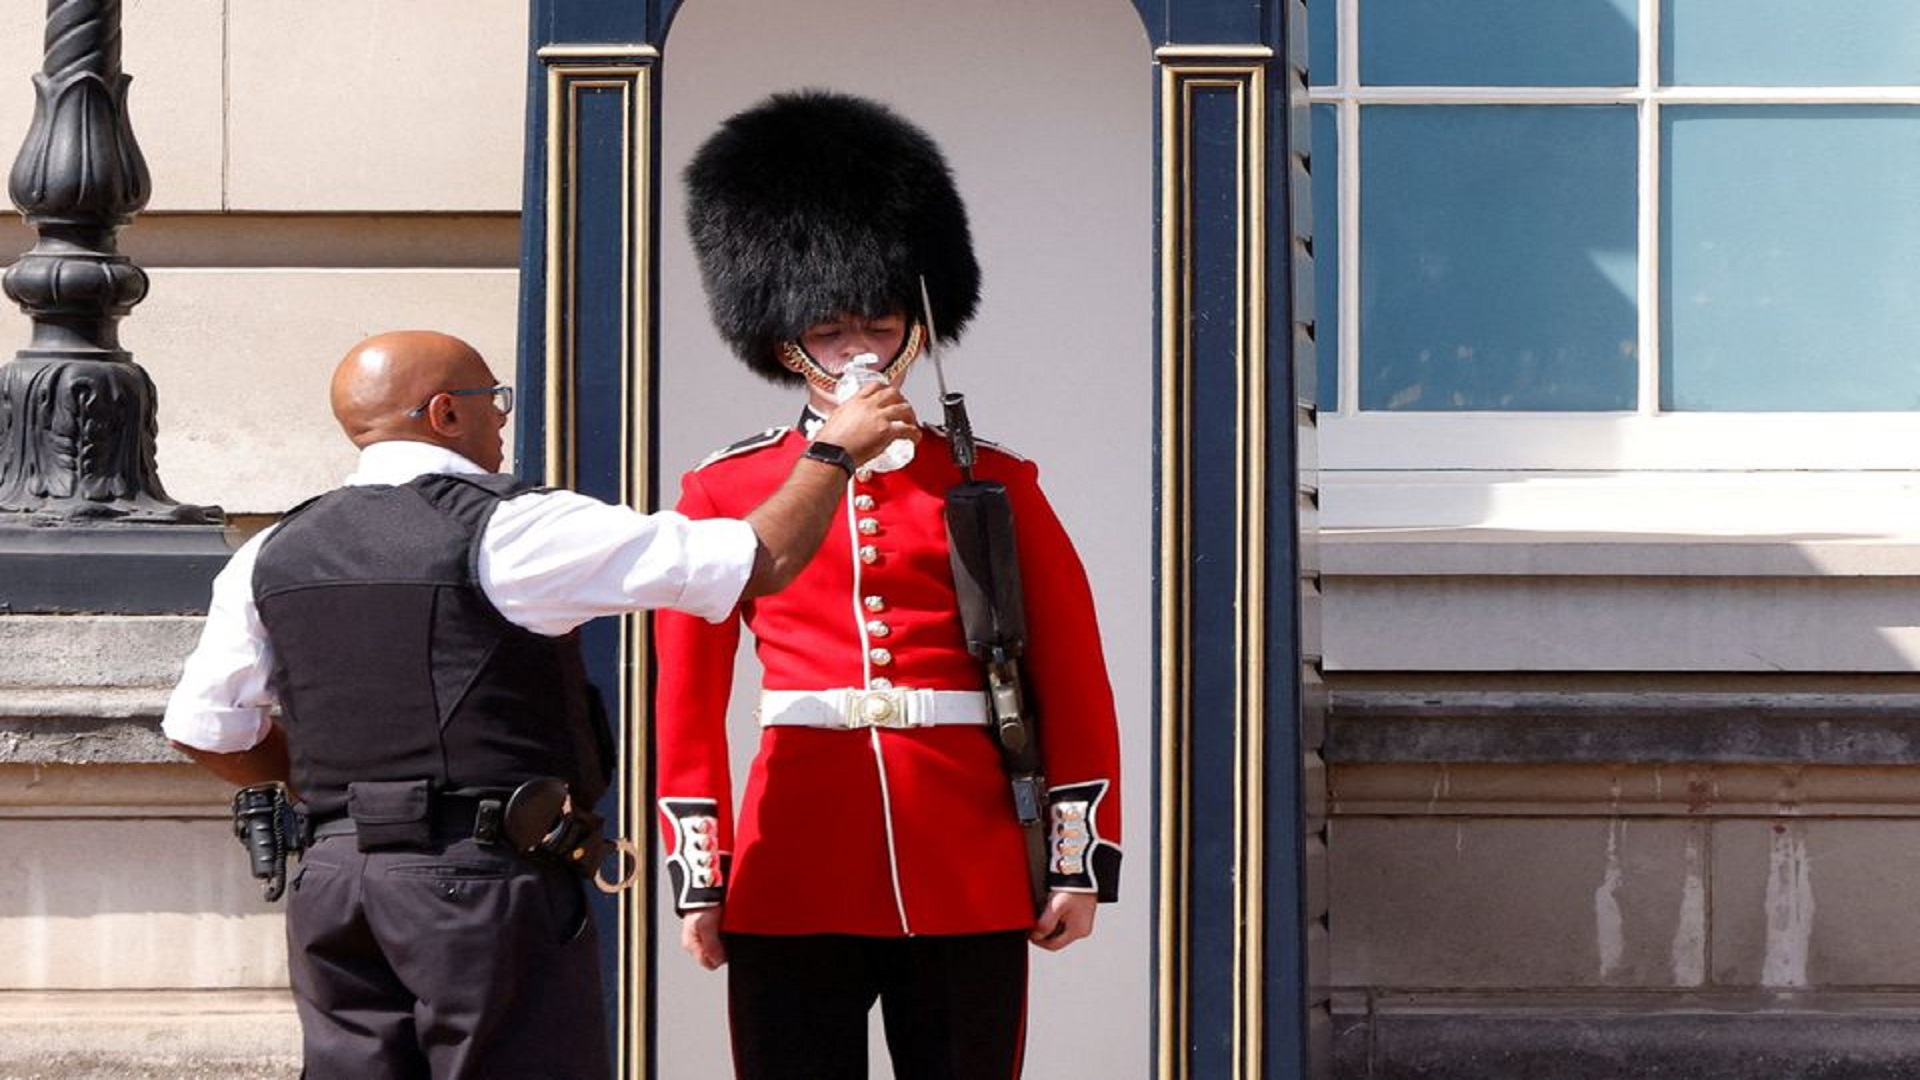 A member of the Queen's Guard receives water to drink during the hot weather, outside Buckingham Palace in London, Britain, July 18, 2022. REUTERS/John Sibley